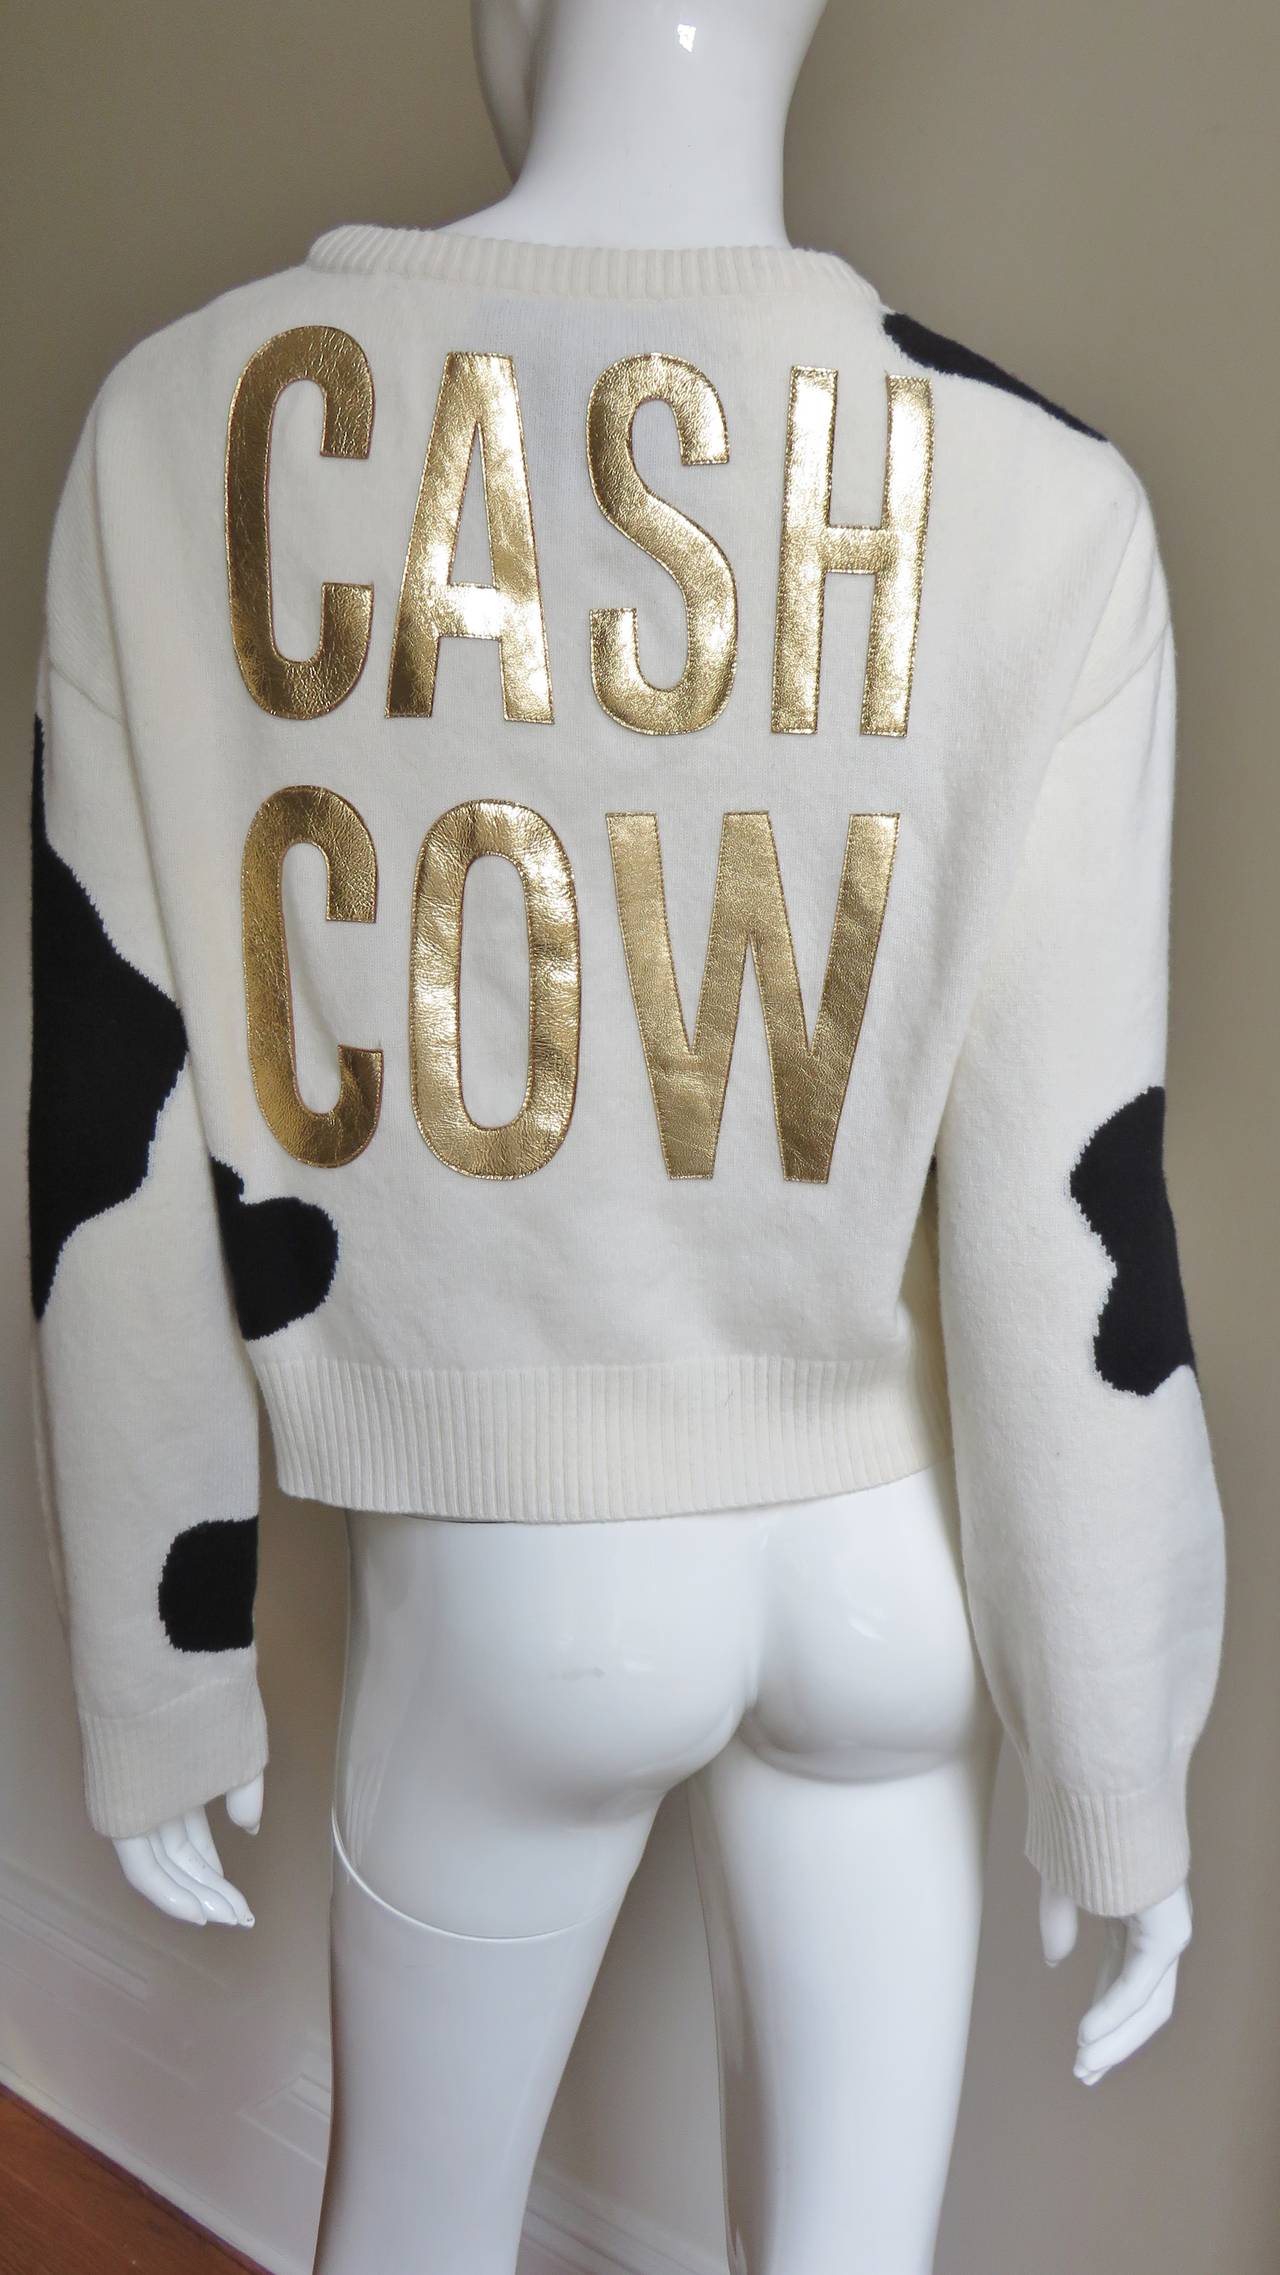 Women's Moschino Couture ' Cash Cow ' Cashmere Sweater